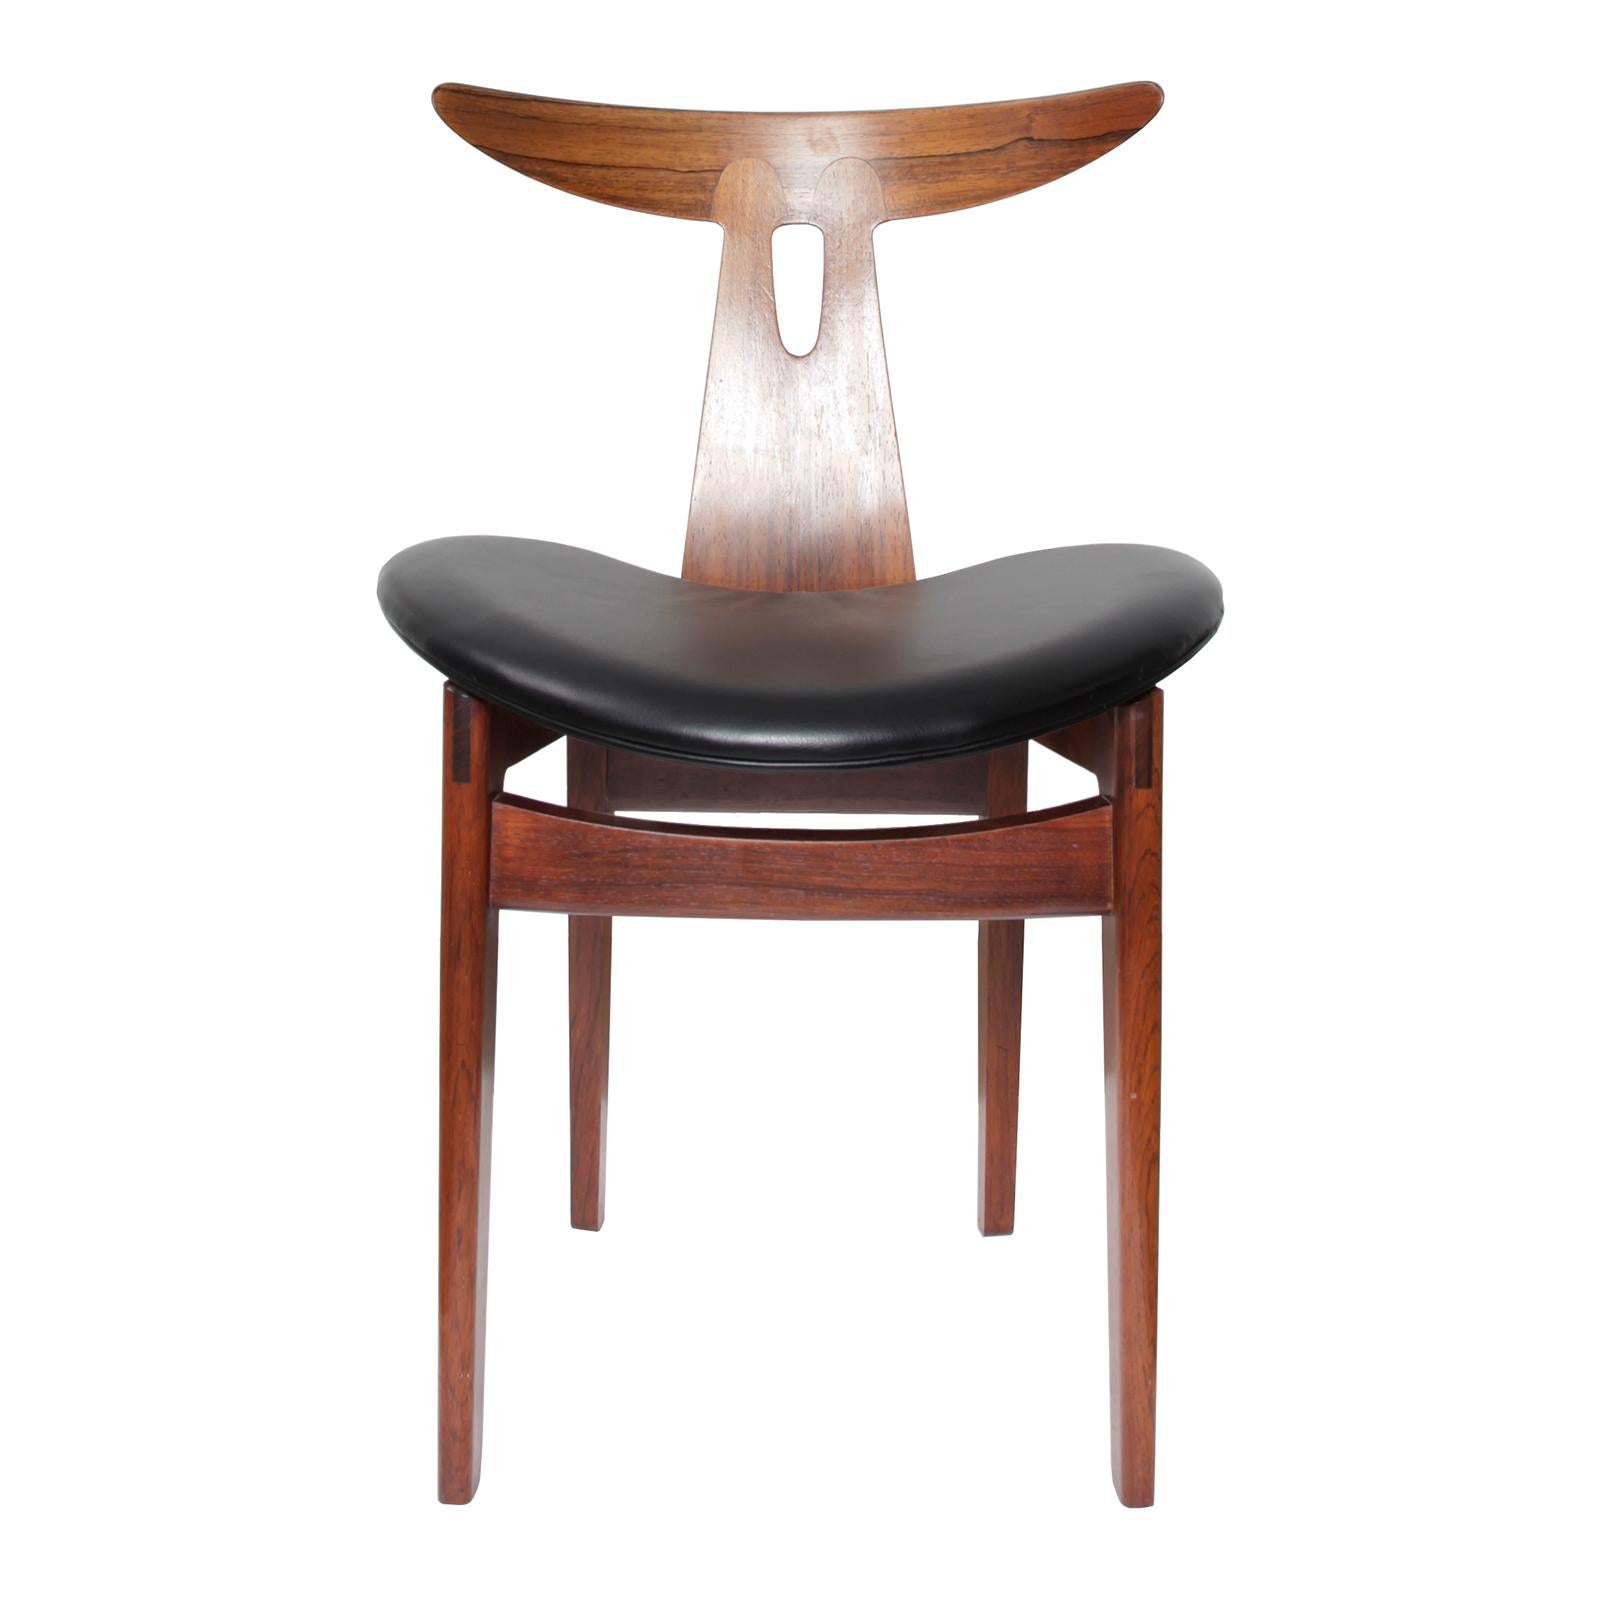 A sculptural side chair in rosewood with seat upholstered in original black leather.
Designed by Vilhelm Wohlert in 1958. Made by cabinetmaker Arne Poulsen, Denmark.